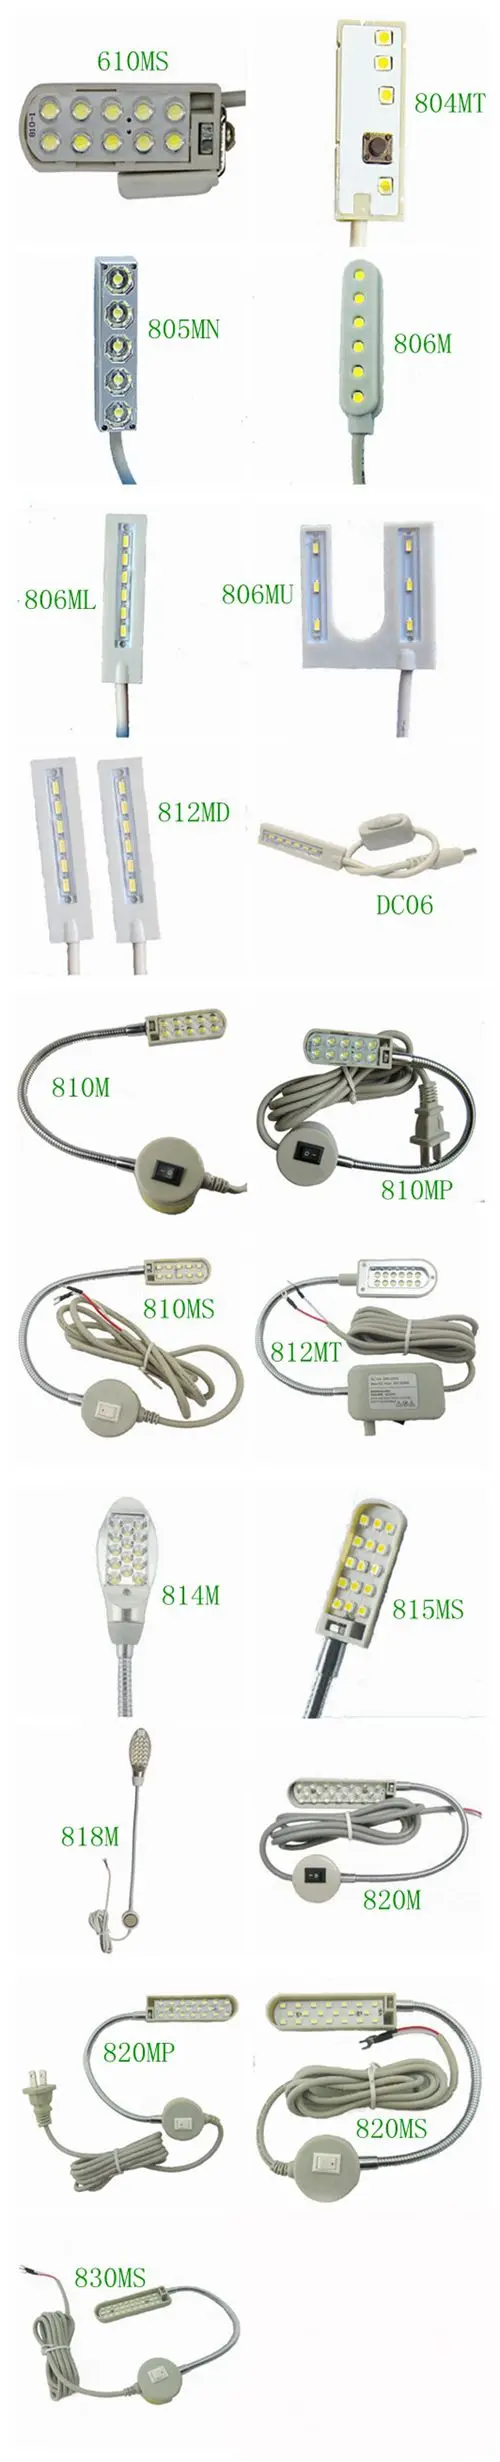 led light for industrial sewing machine